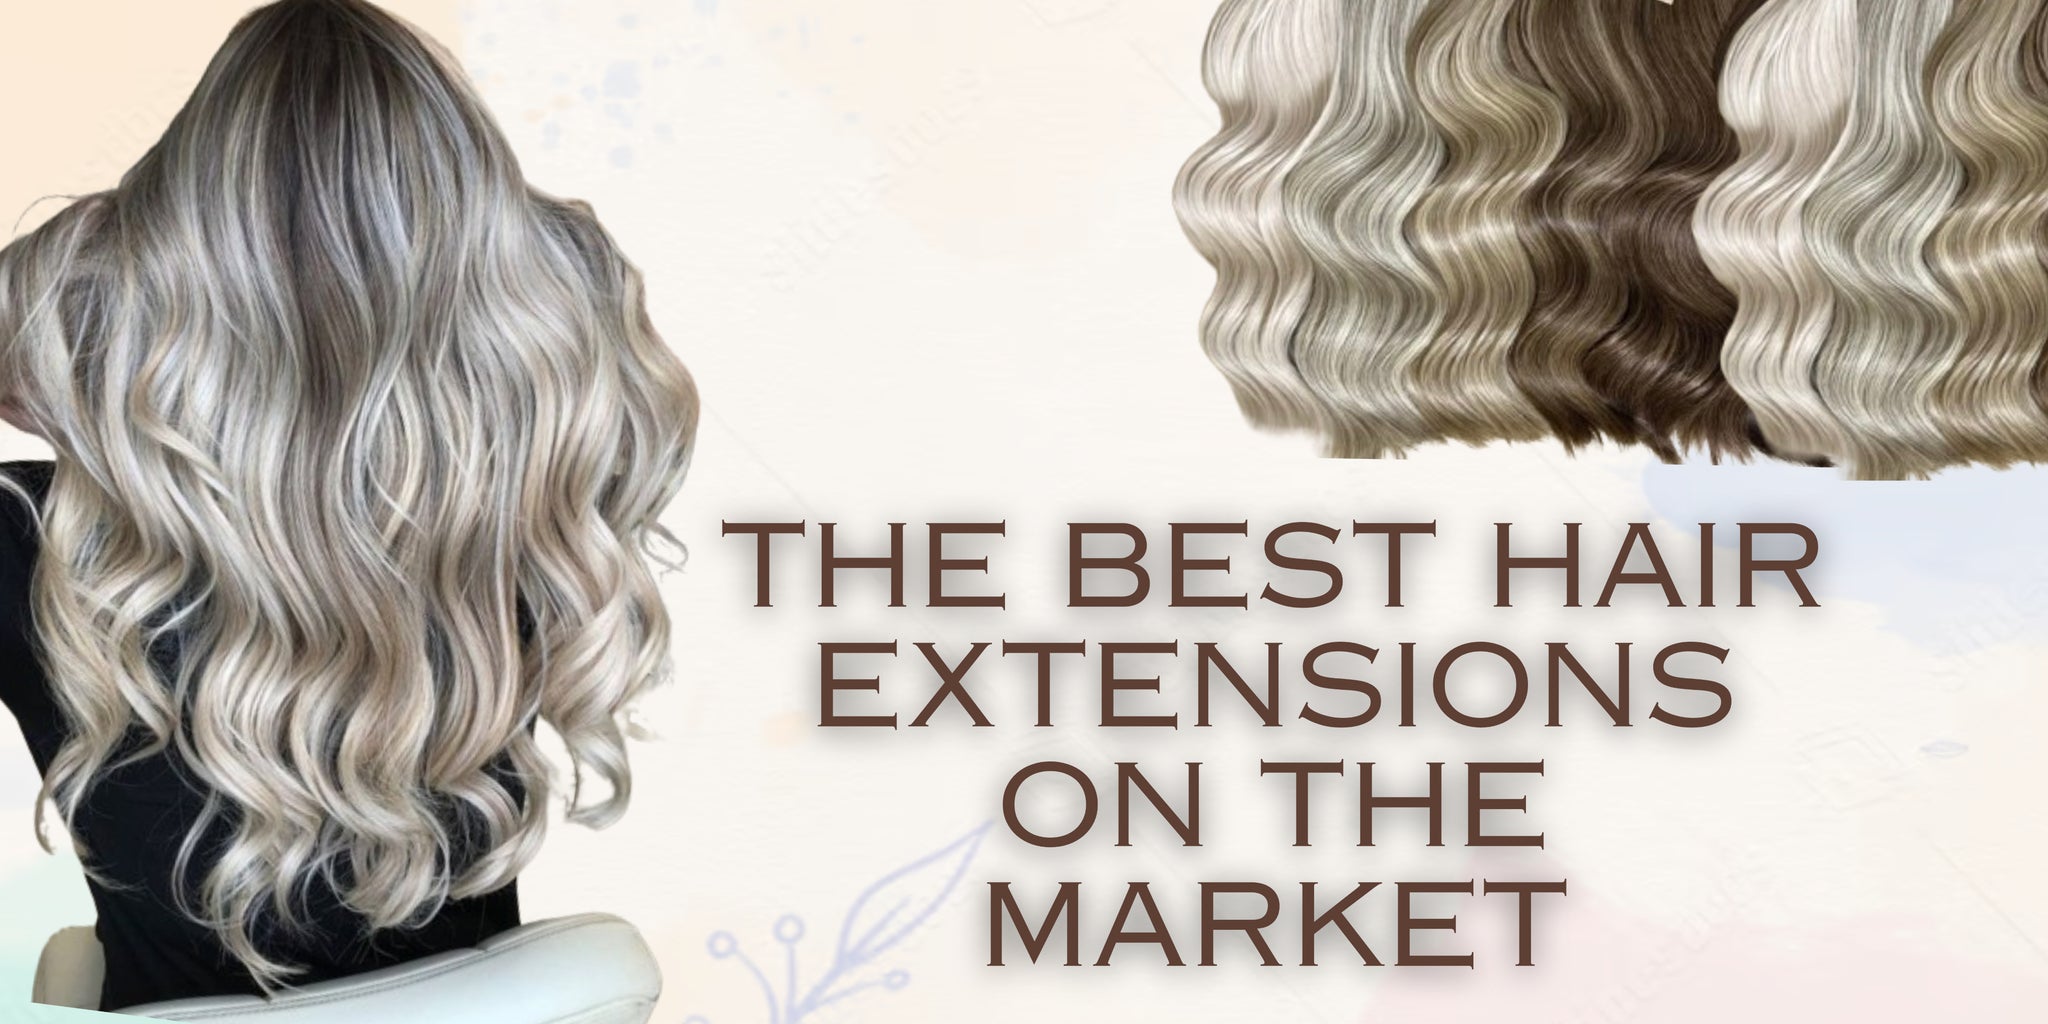 The best hair extensions on the market